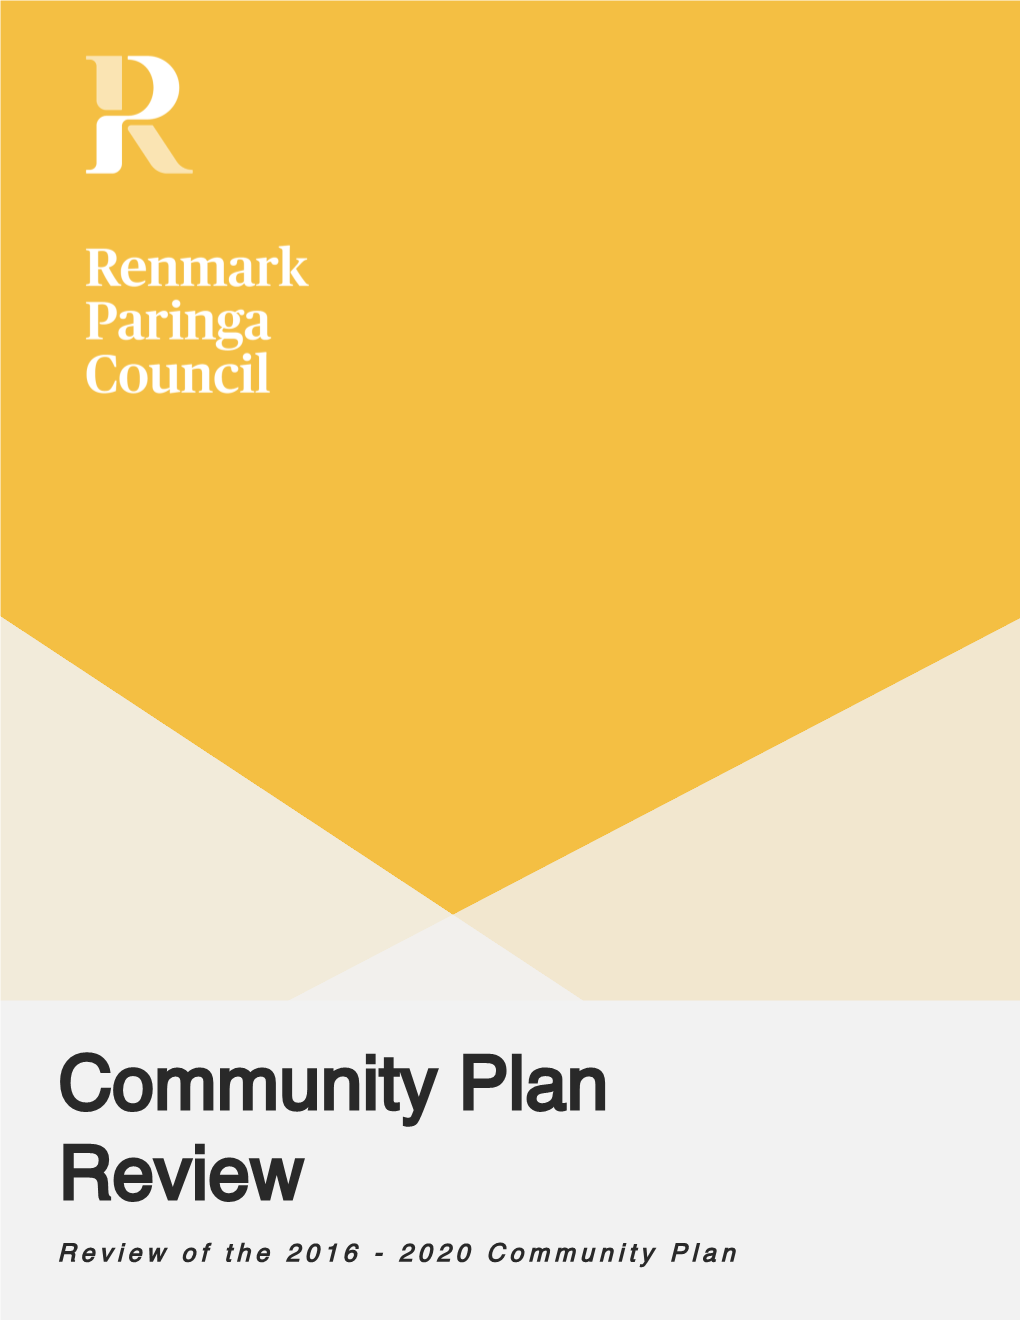 Community Plan Review 2016-2020